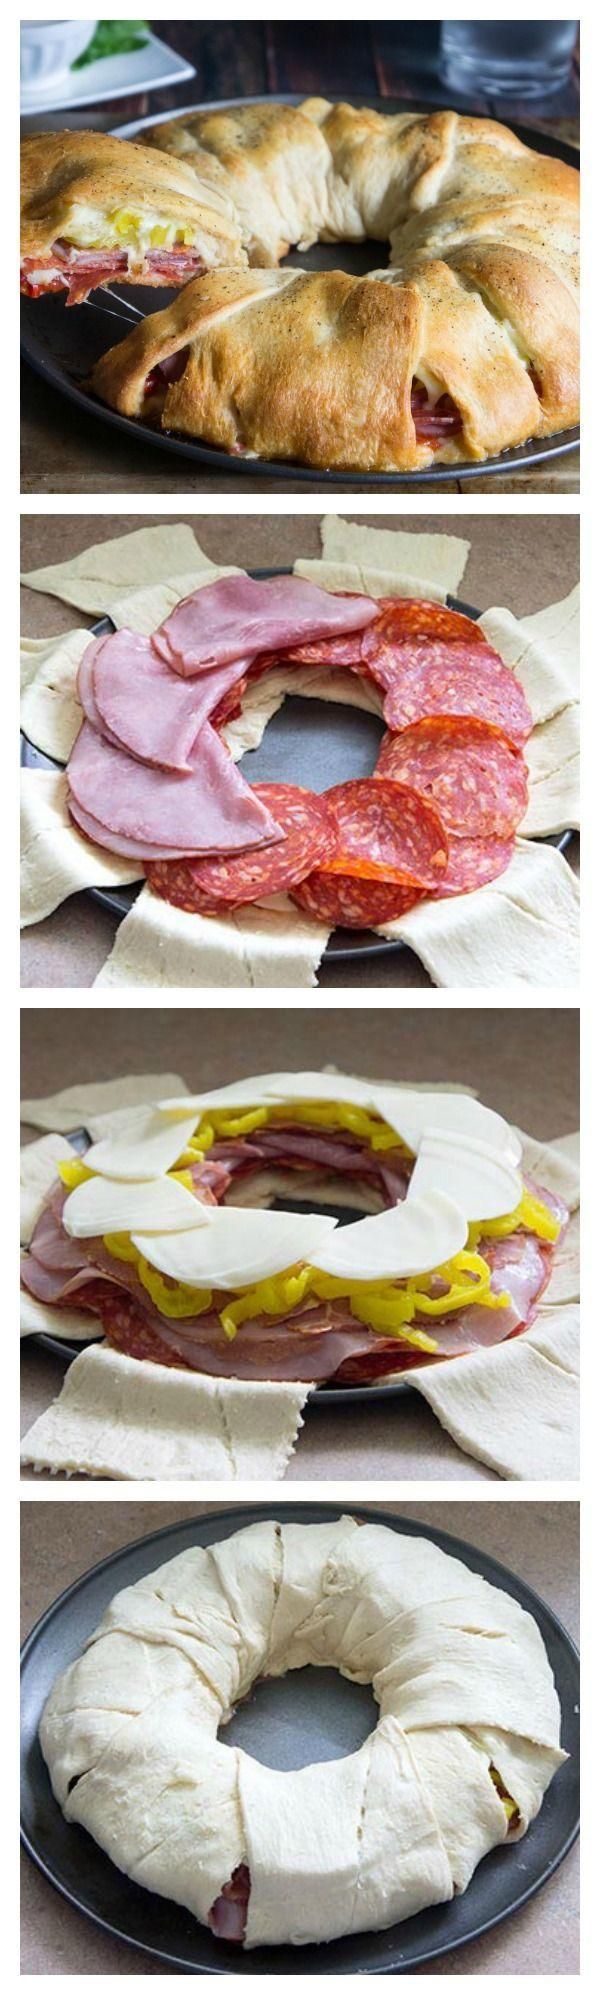 Genius: a sandwich ring! Use cold cuts (salami, ham, whatever), hot peppers, cheese, wrap up in savoury pastry (ex. pillsbury